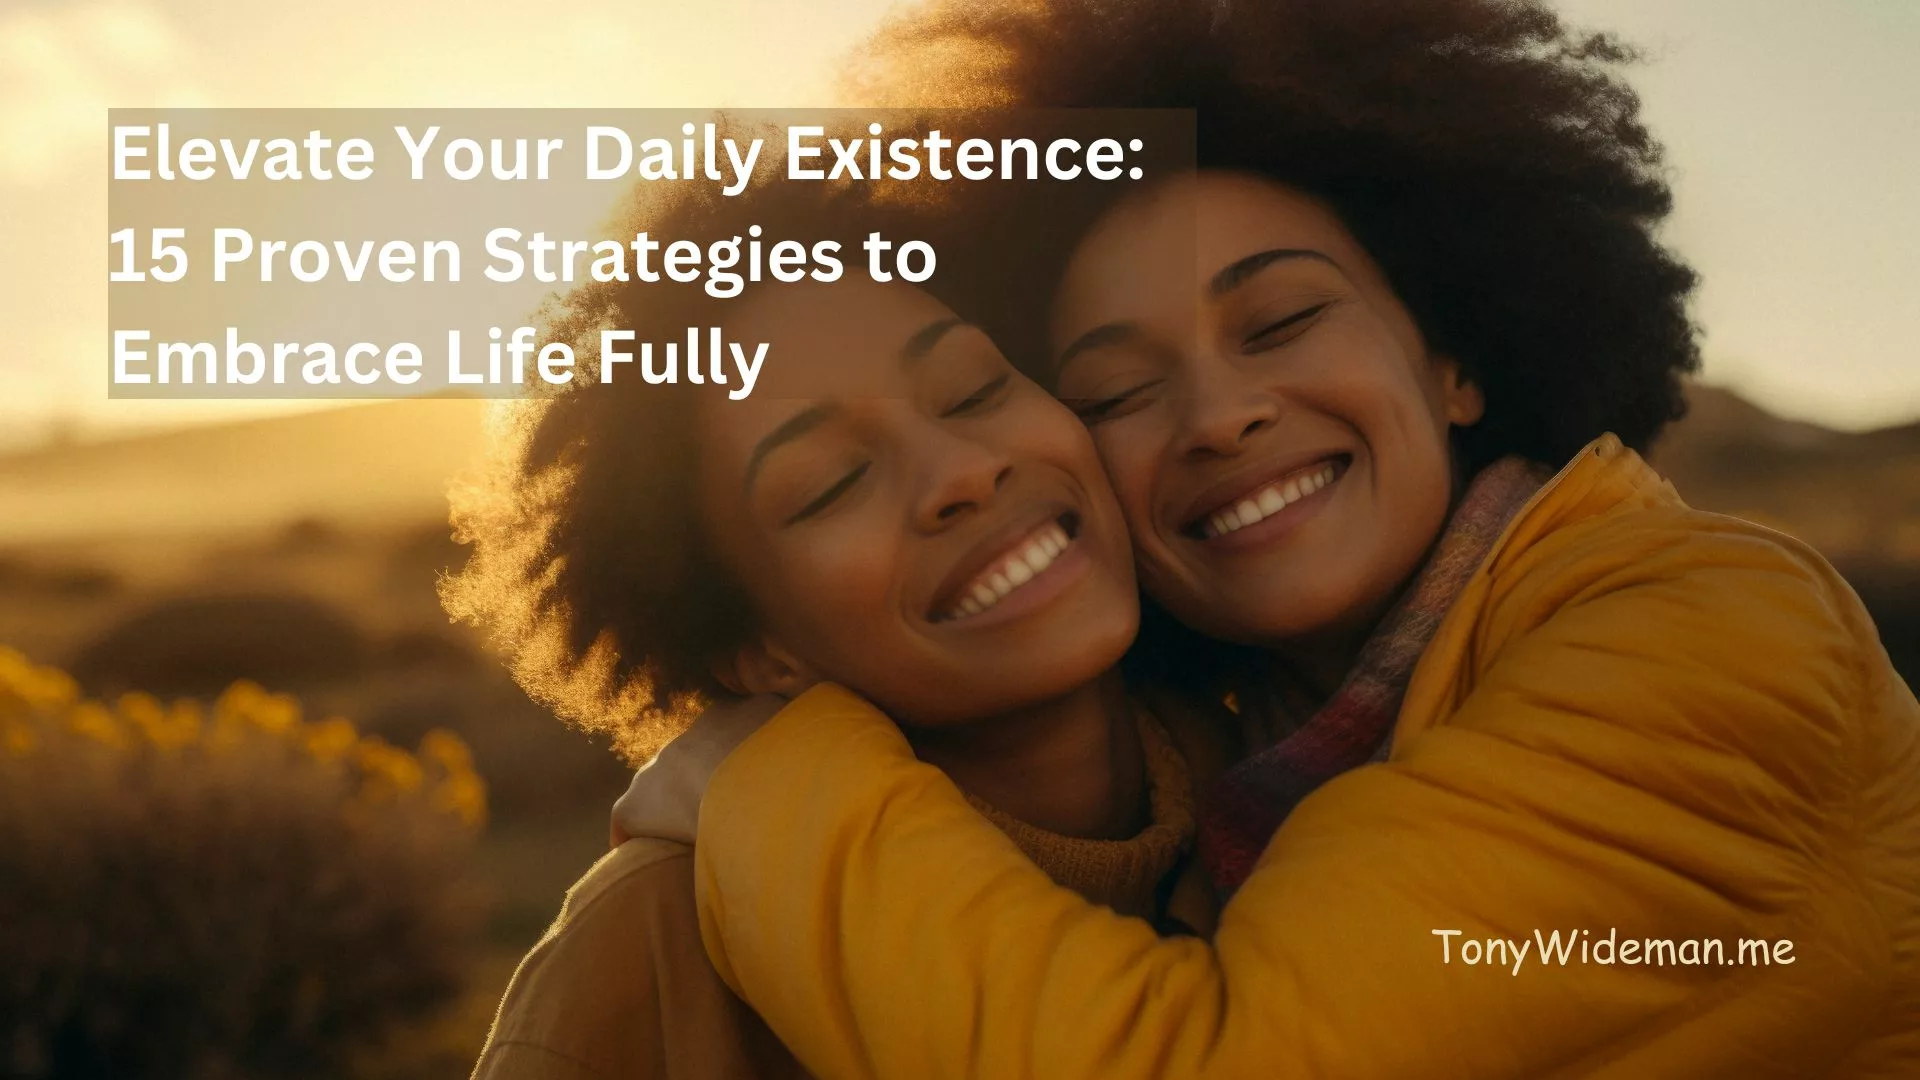 Elevate Your Daily Existence: 15 Proven Strategies to Embrace Life Fully